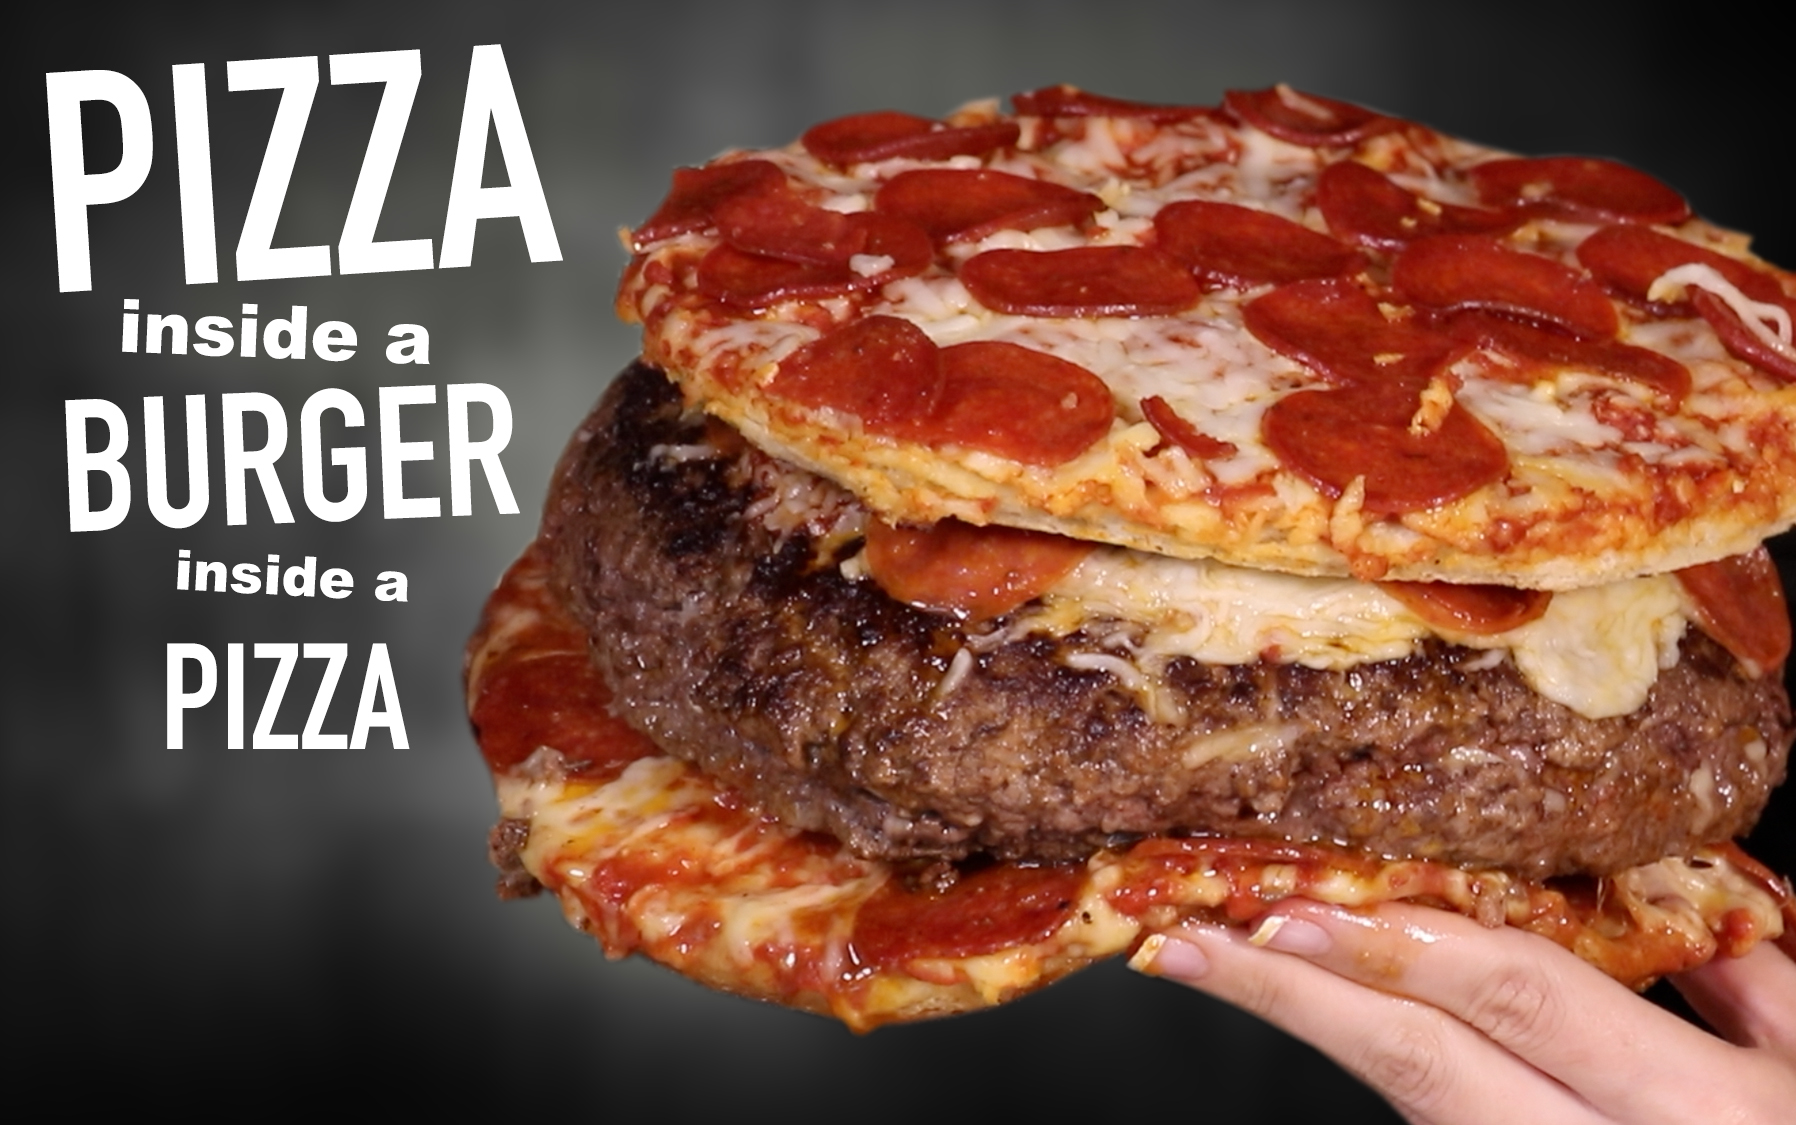 A hand holding a burger with two pizzas for buns. To the left of the burger is the caption 'Pizza Inside a Burger Inside a Pizza.'